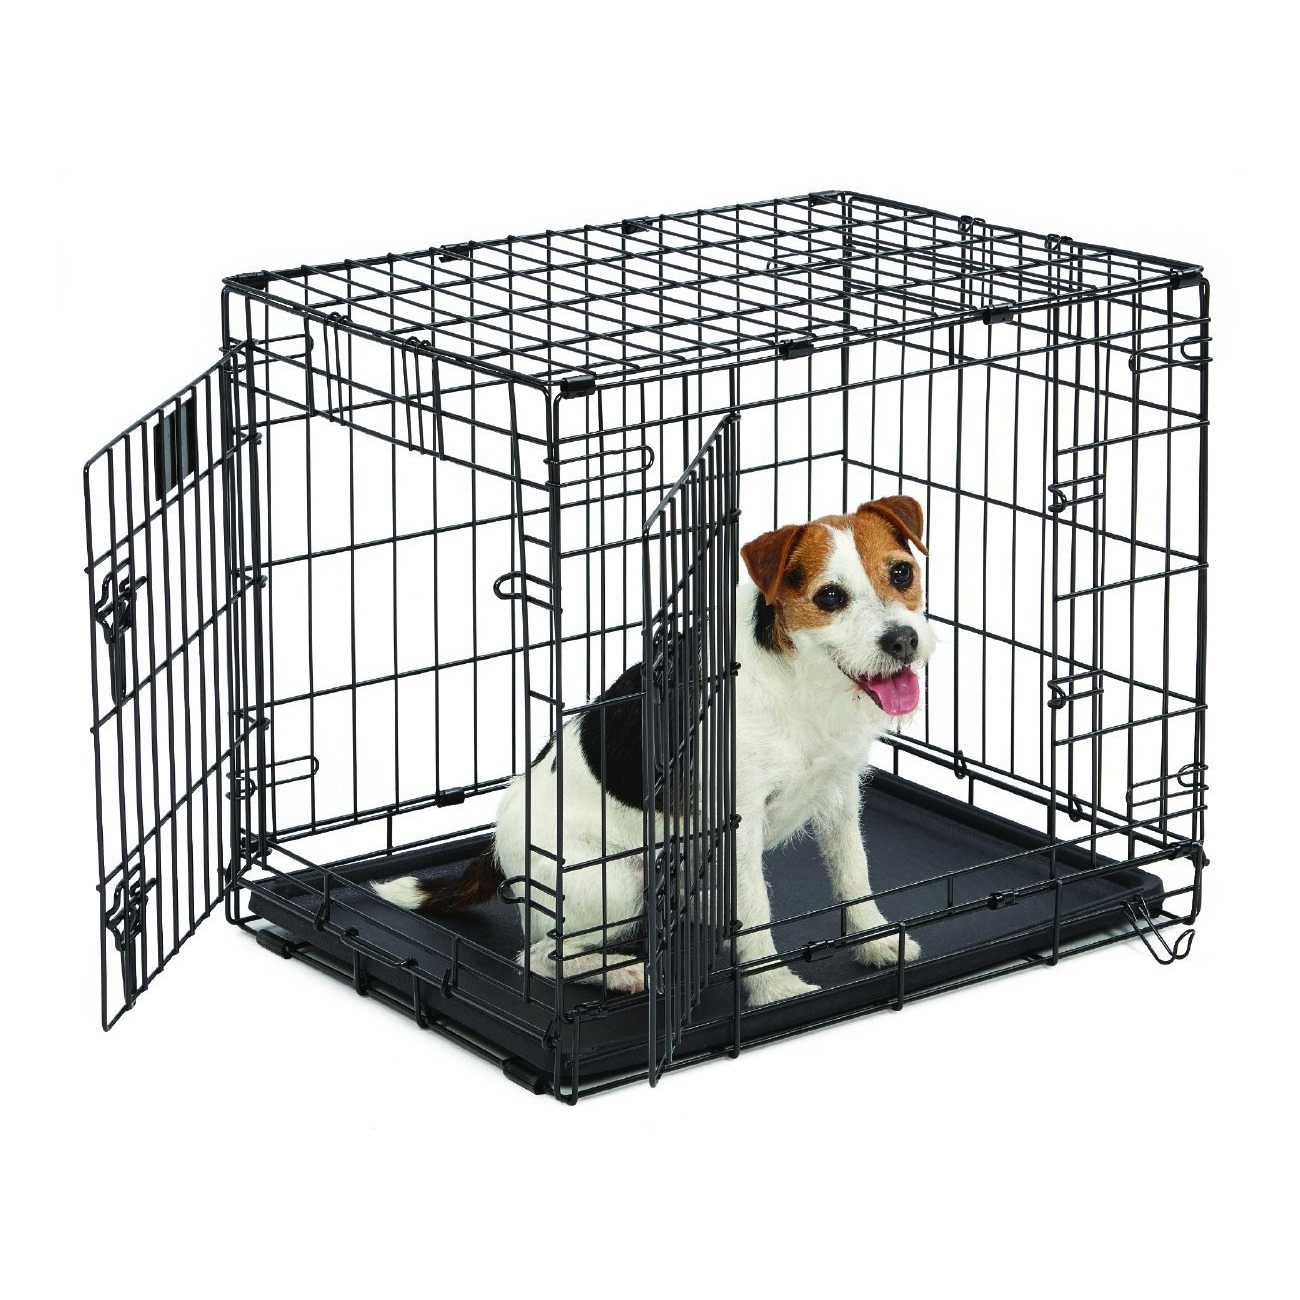 Midwest "Contour" Double Door Dog Crate with Divider image 1